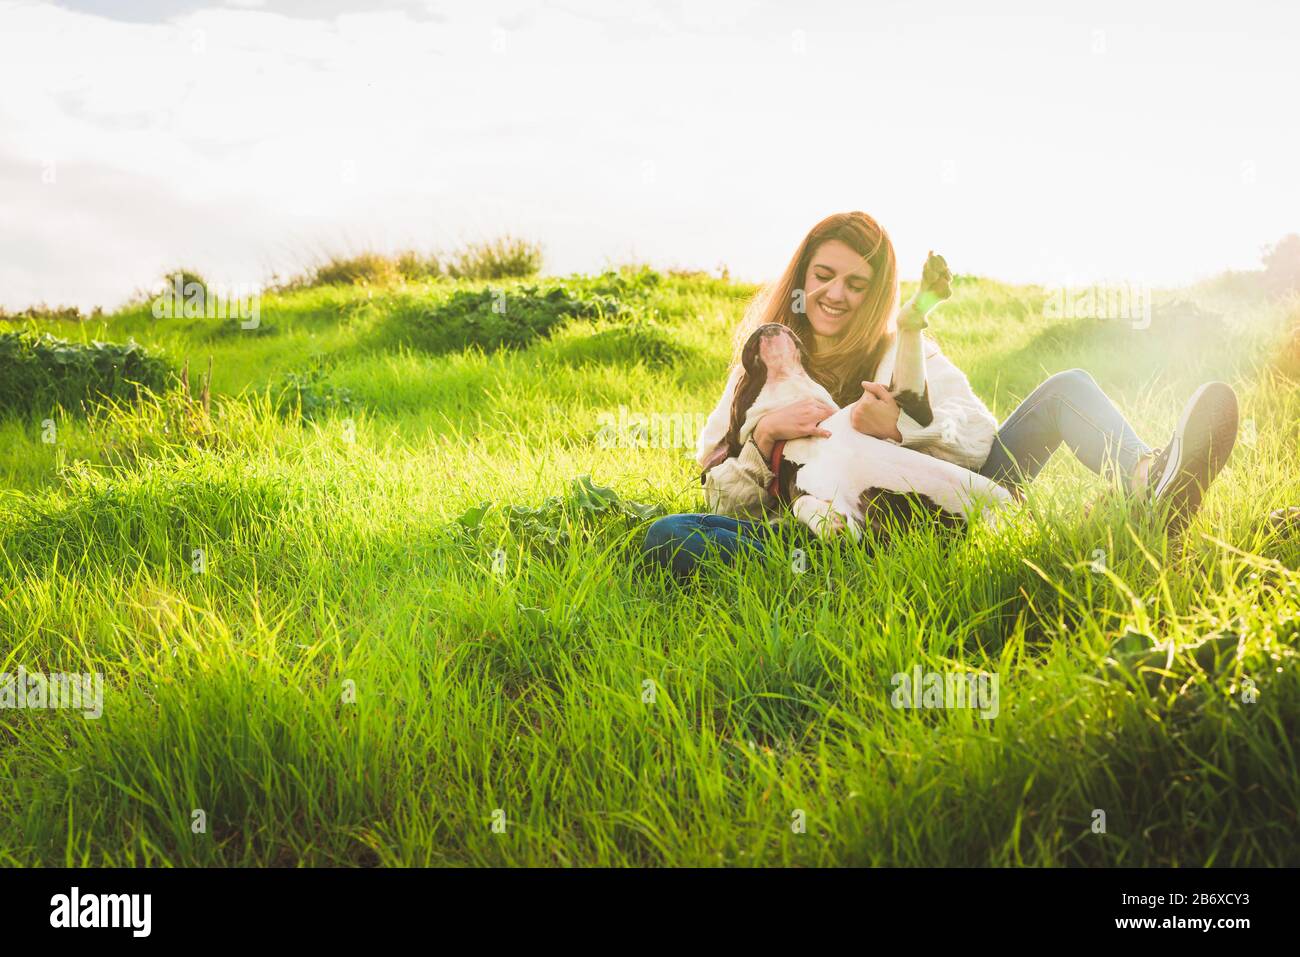 Young woman with white jersey and jeans playing with American Staffordshire terrier in the field Stock Photo